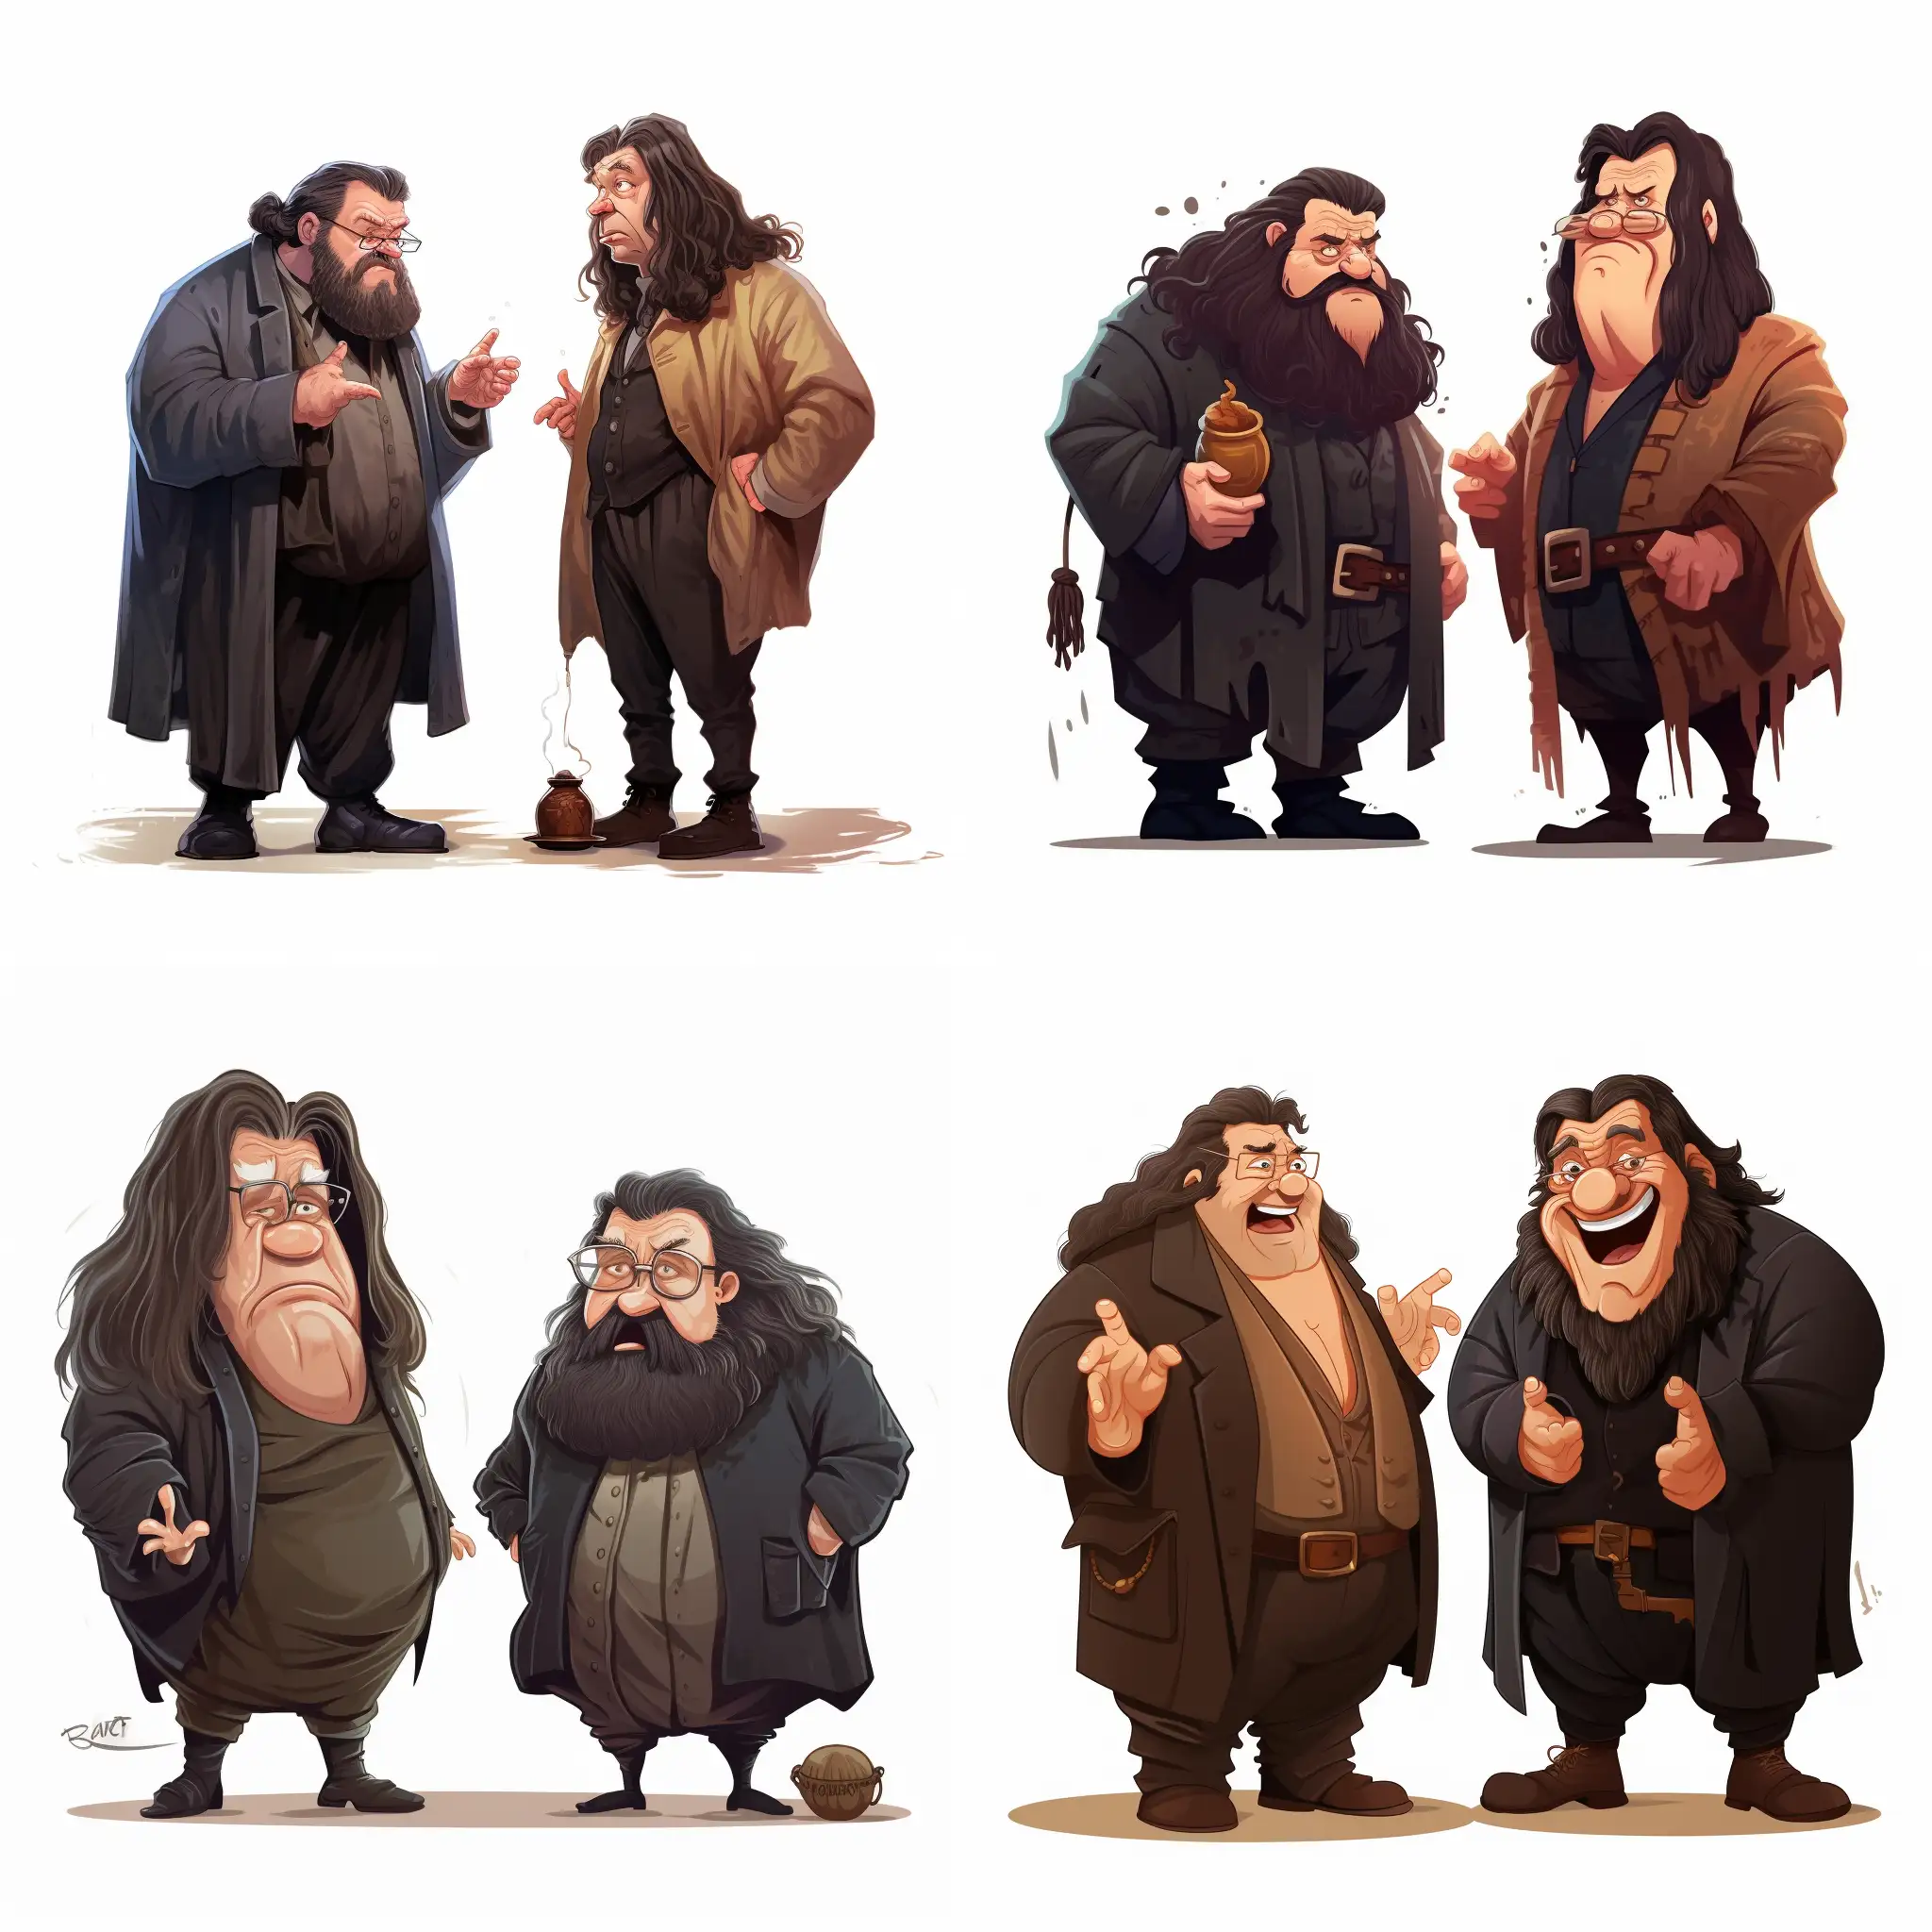 Hagrid-and-Sirius-Black-Engage-in-Animated-Conversation-on-White-Background